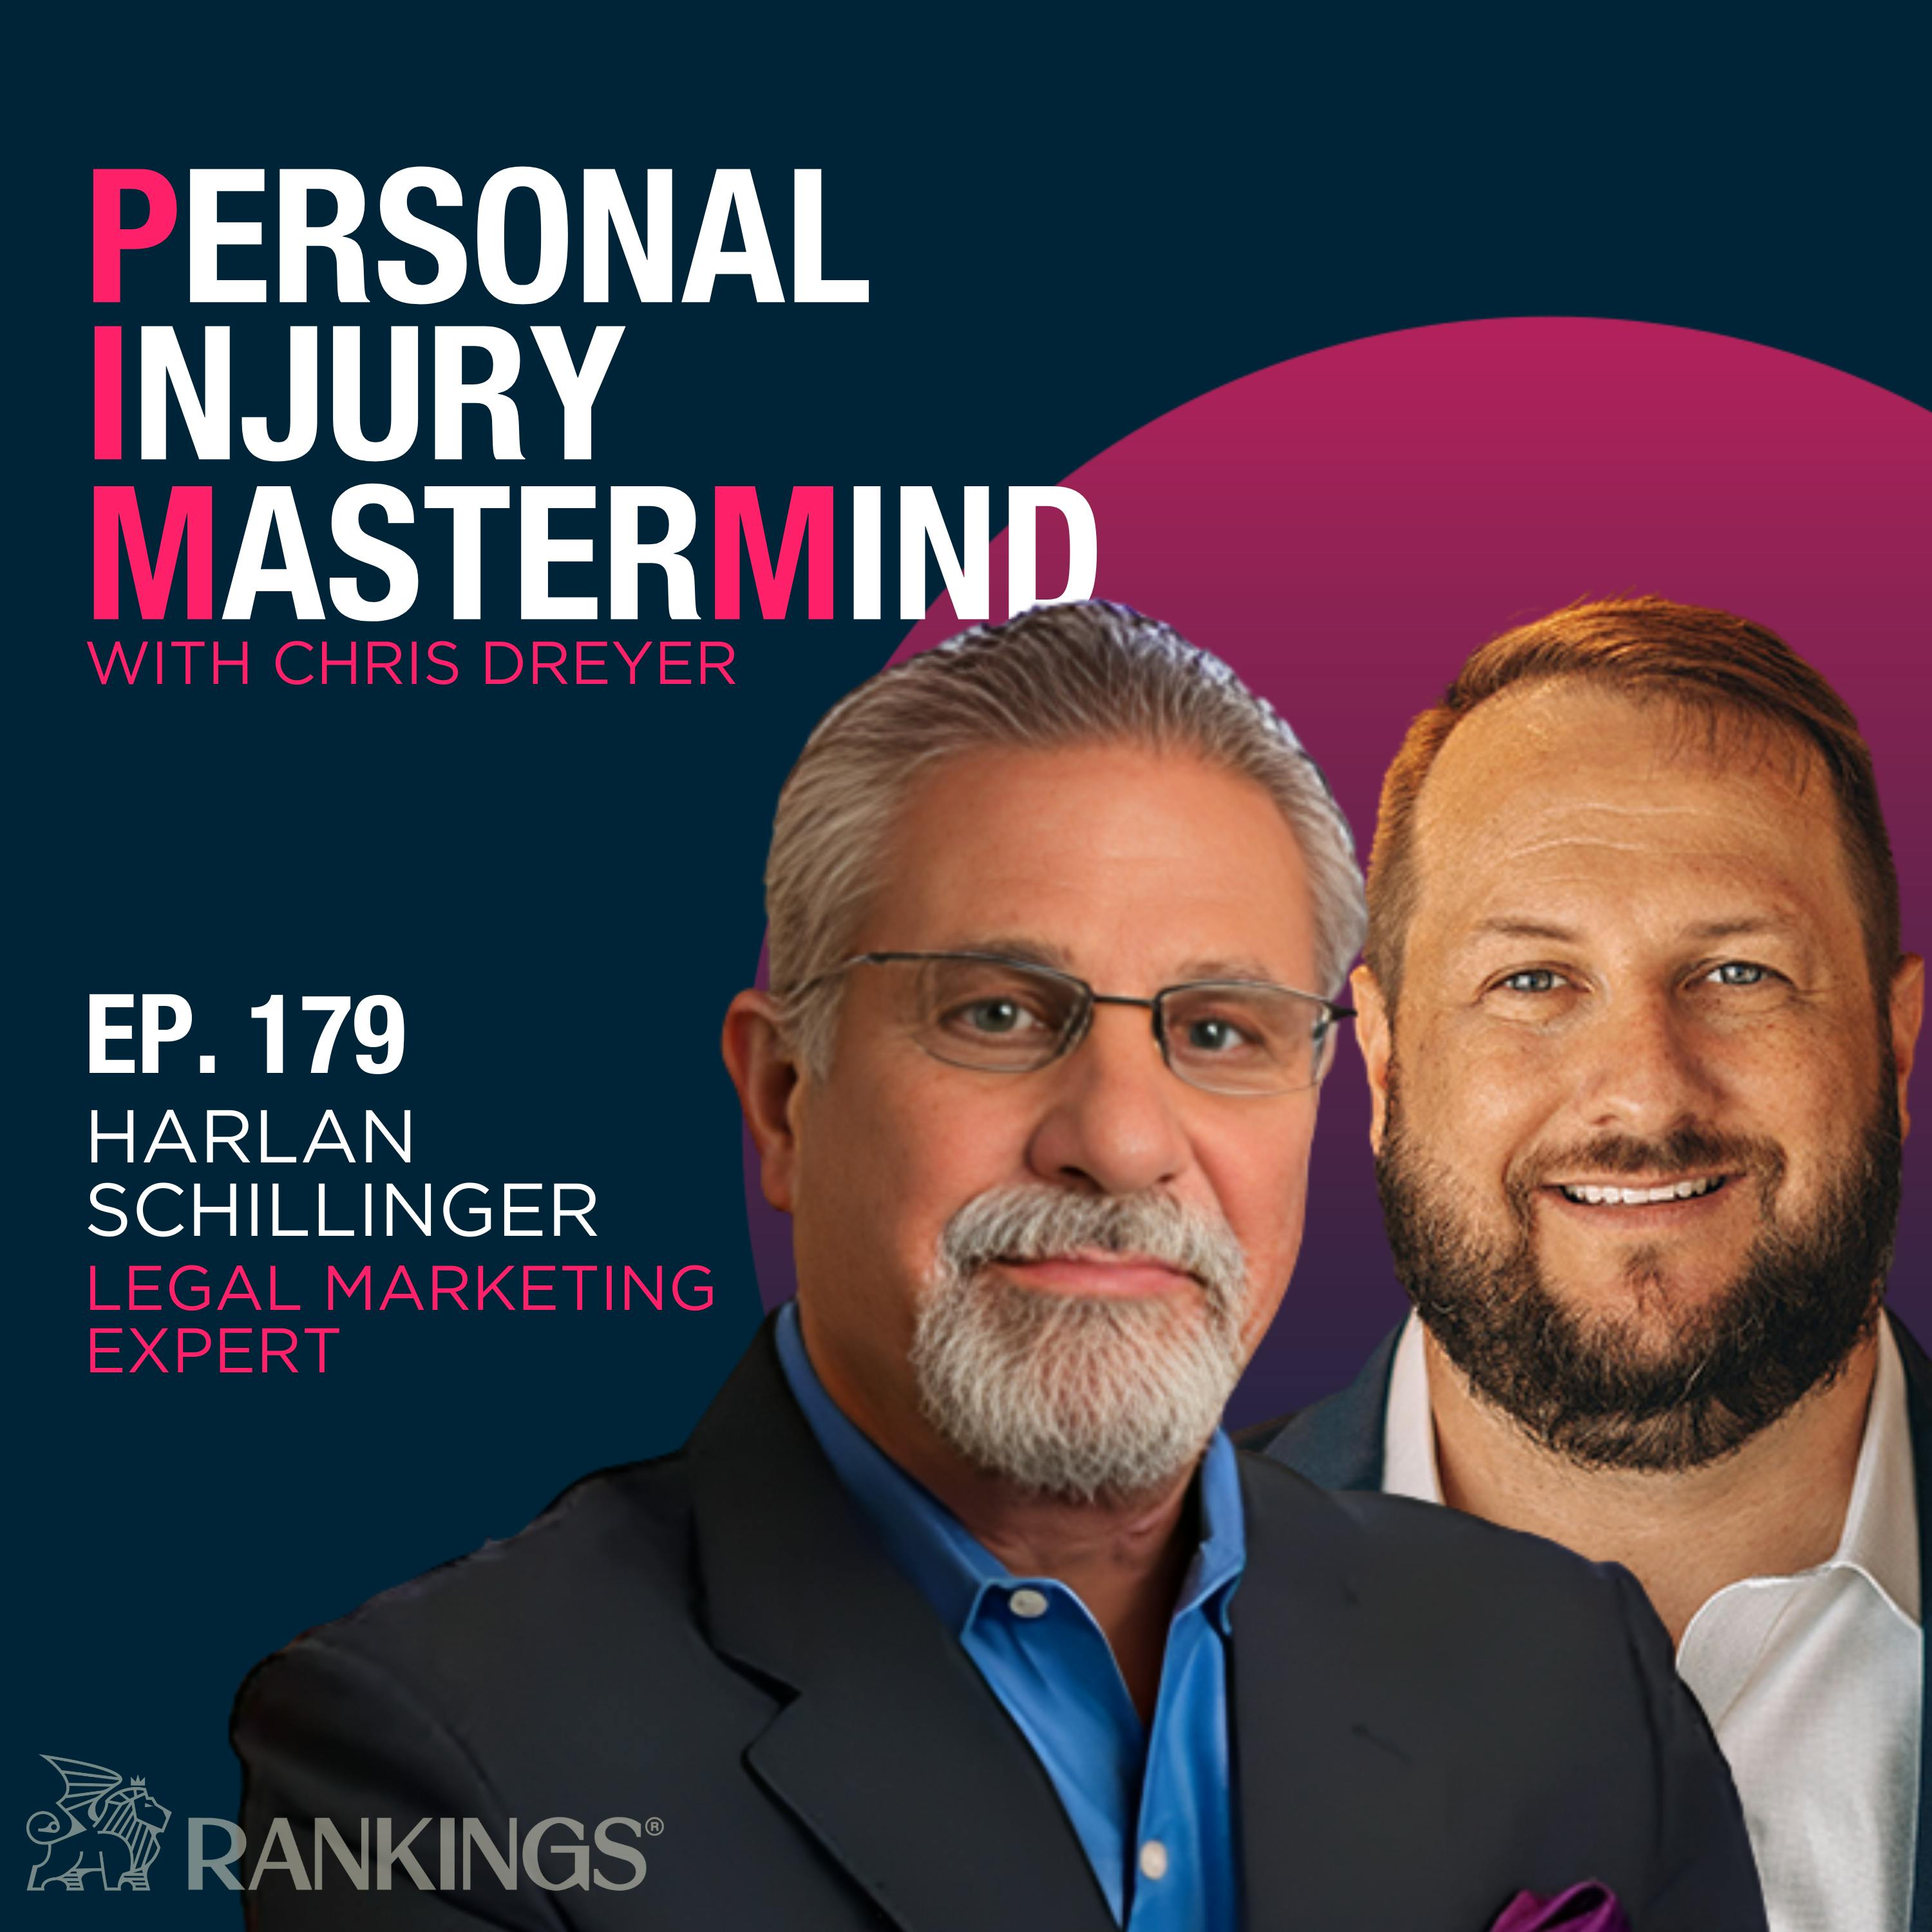 179. Harlan Schillinger, Round 2 – Make More Money: Case Acquisition, Public Perception, and Practicing Better Law.